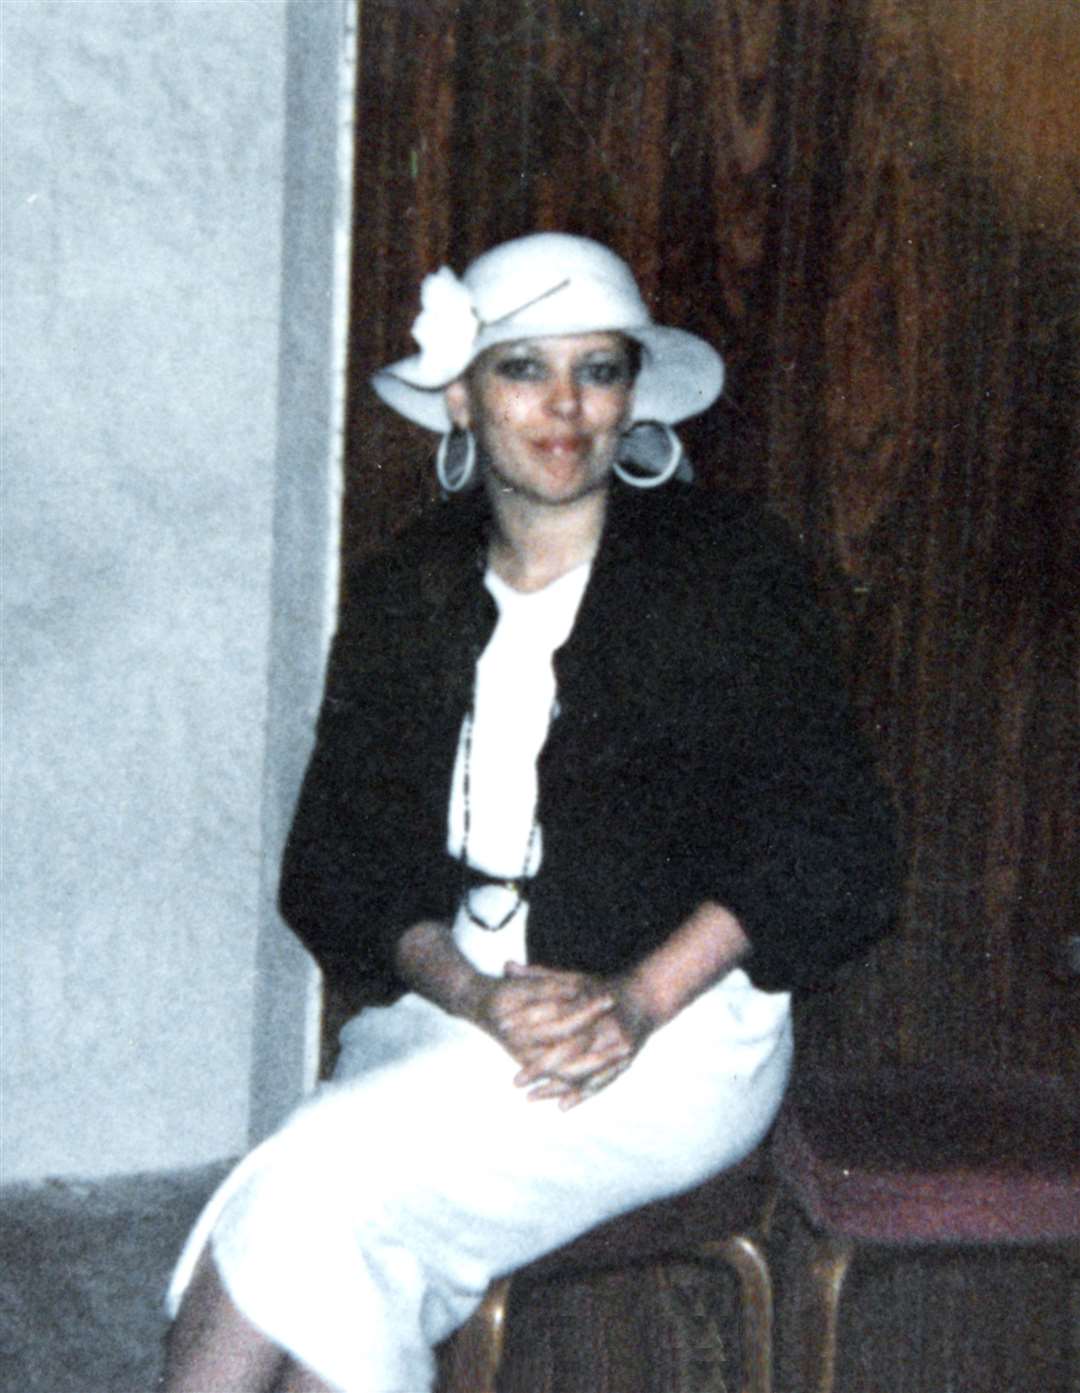 Mother of four Glenda was just 32 when she was brutally killed and her half naked body found in a Rochester churchyard